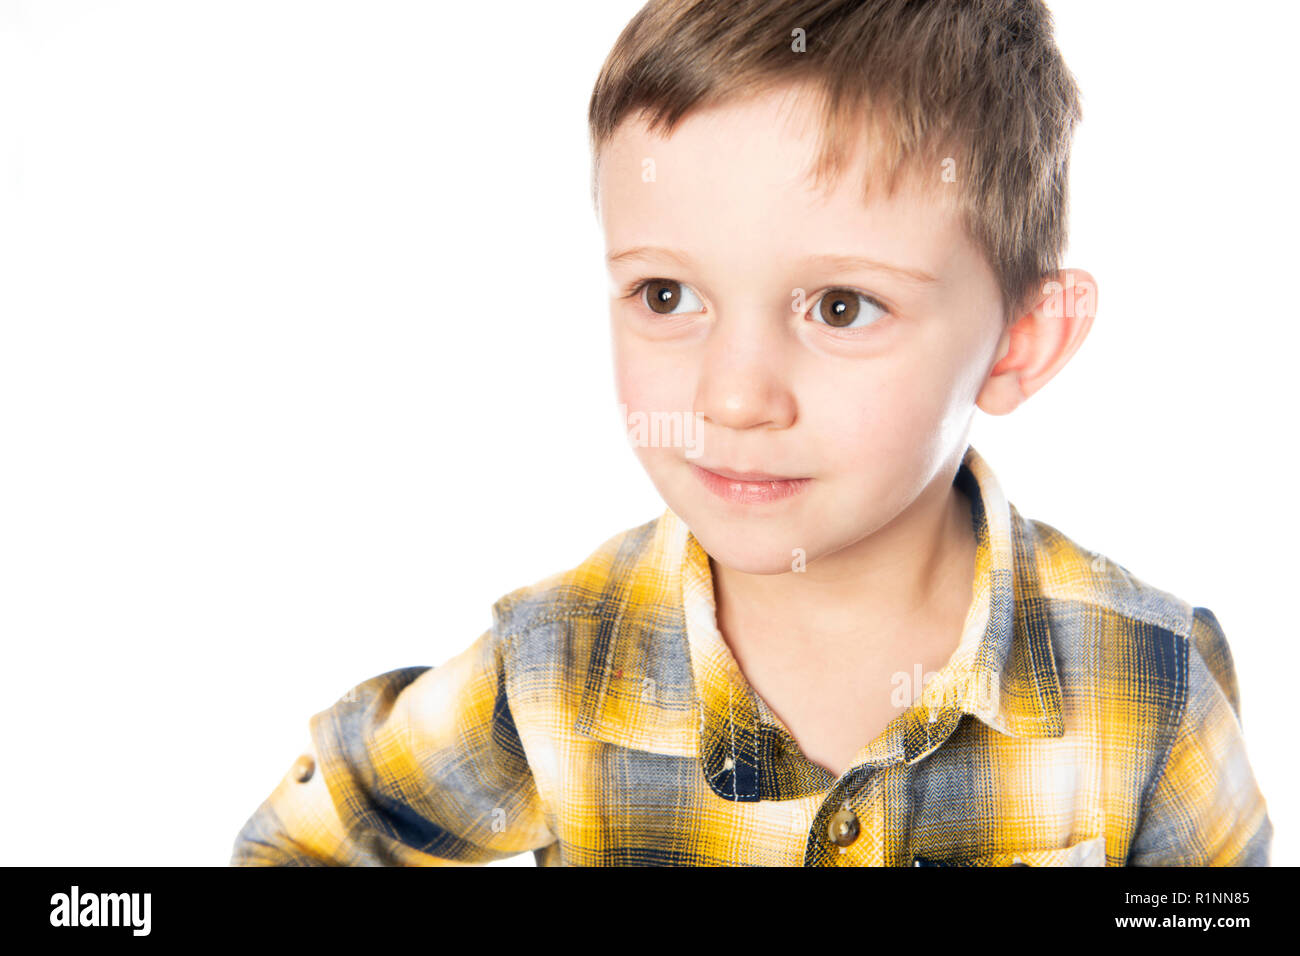 A boy shot in the studio on a white background. Stock Photo